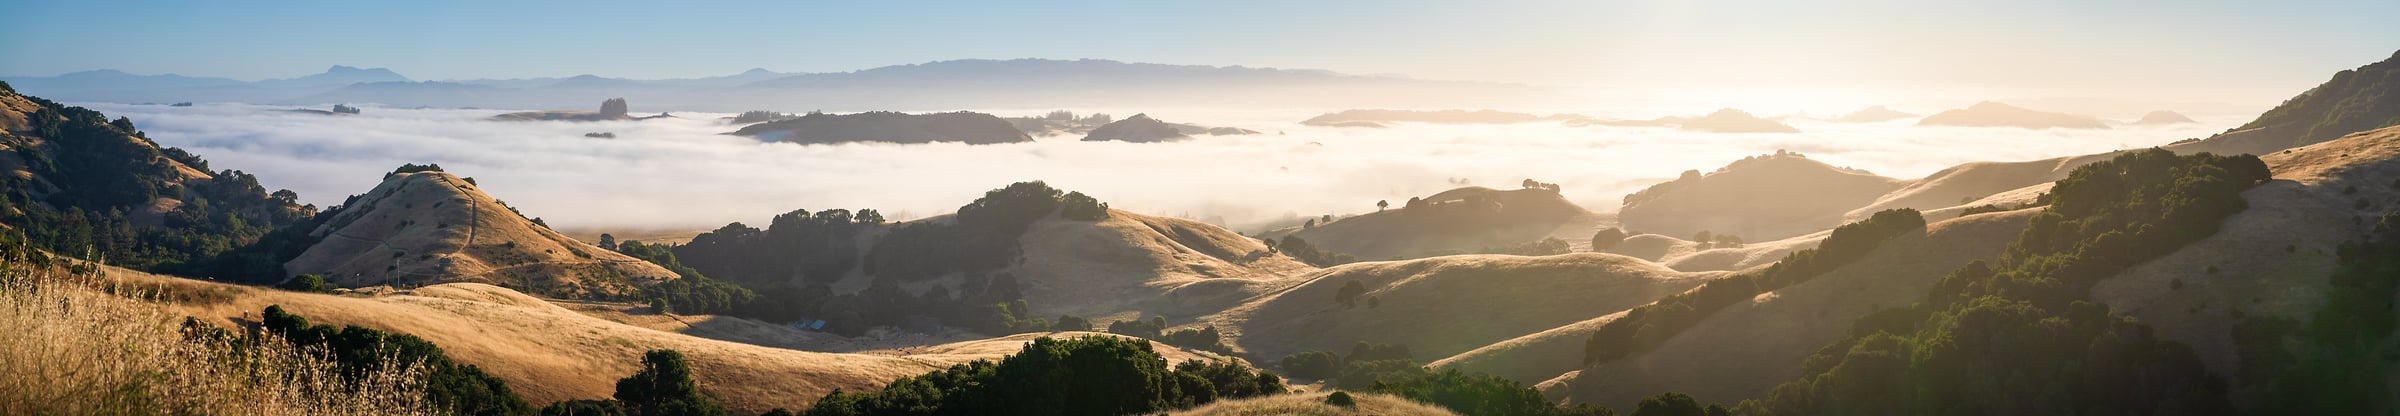 373 megapixels! A very high resolution, large-format VAST photo print of rolling hills at sunrise; panorama wallpaper photograph created by Jeff Lewis in Petaluma, California